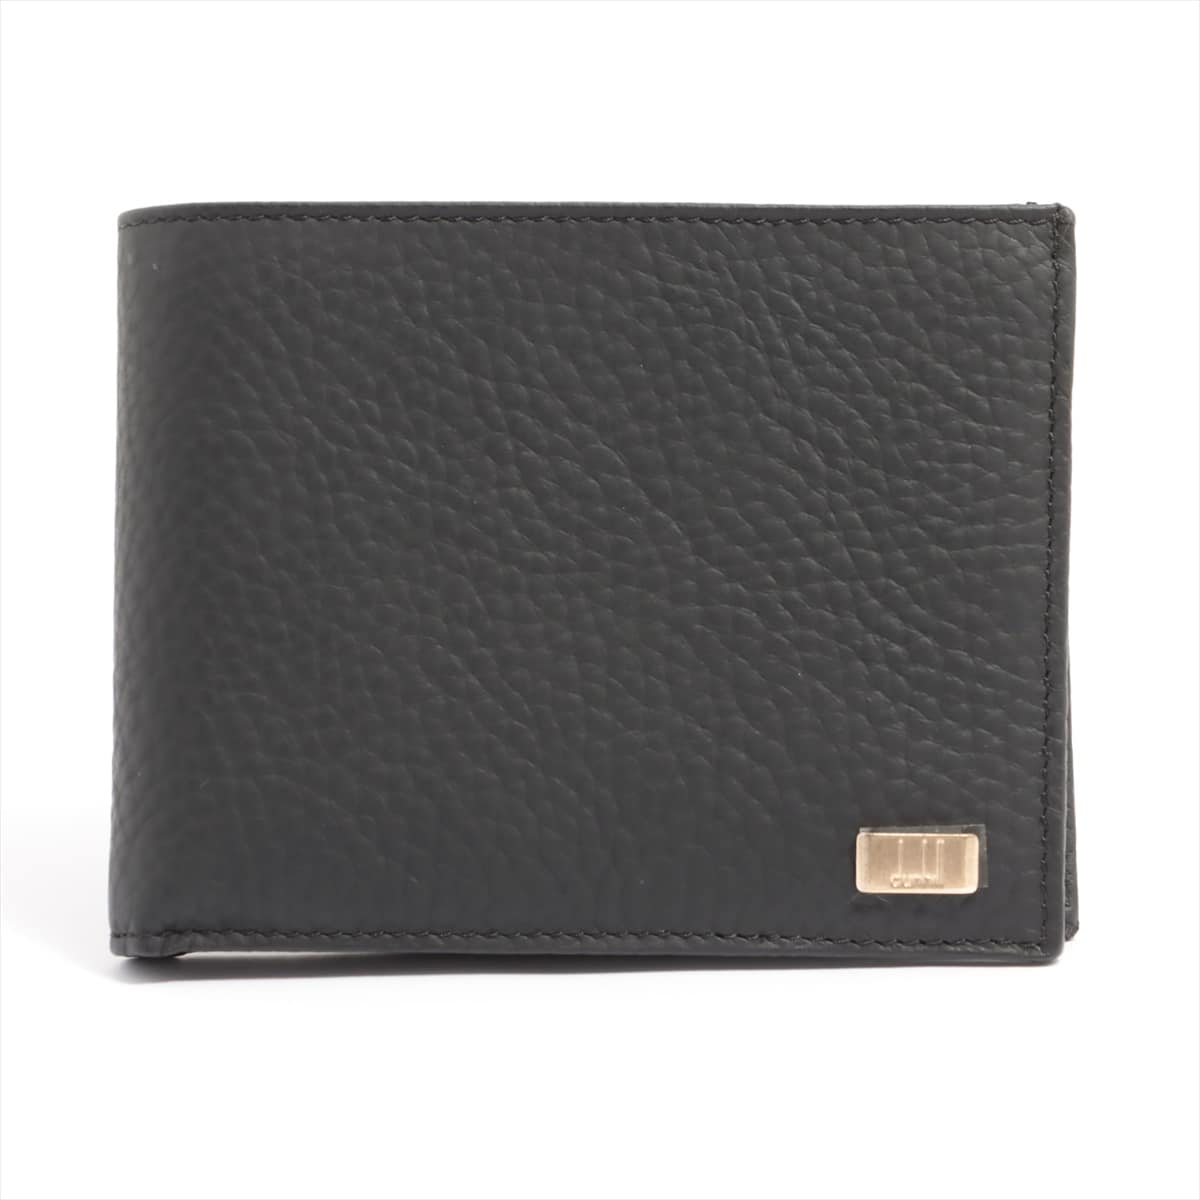 Dunhill Leather Wallet Black